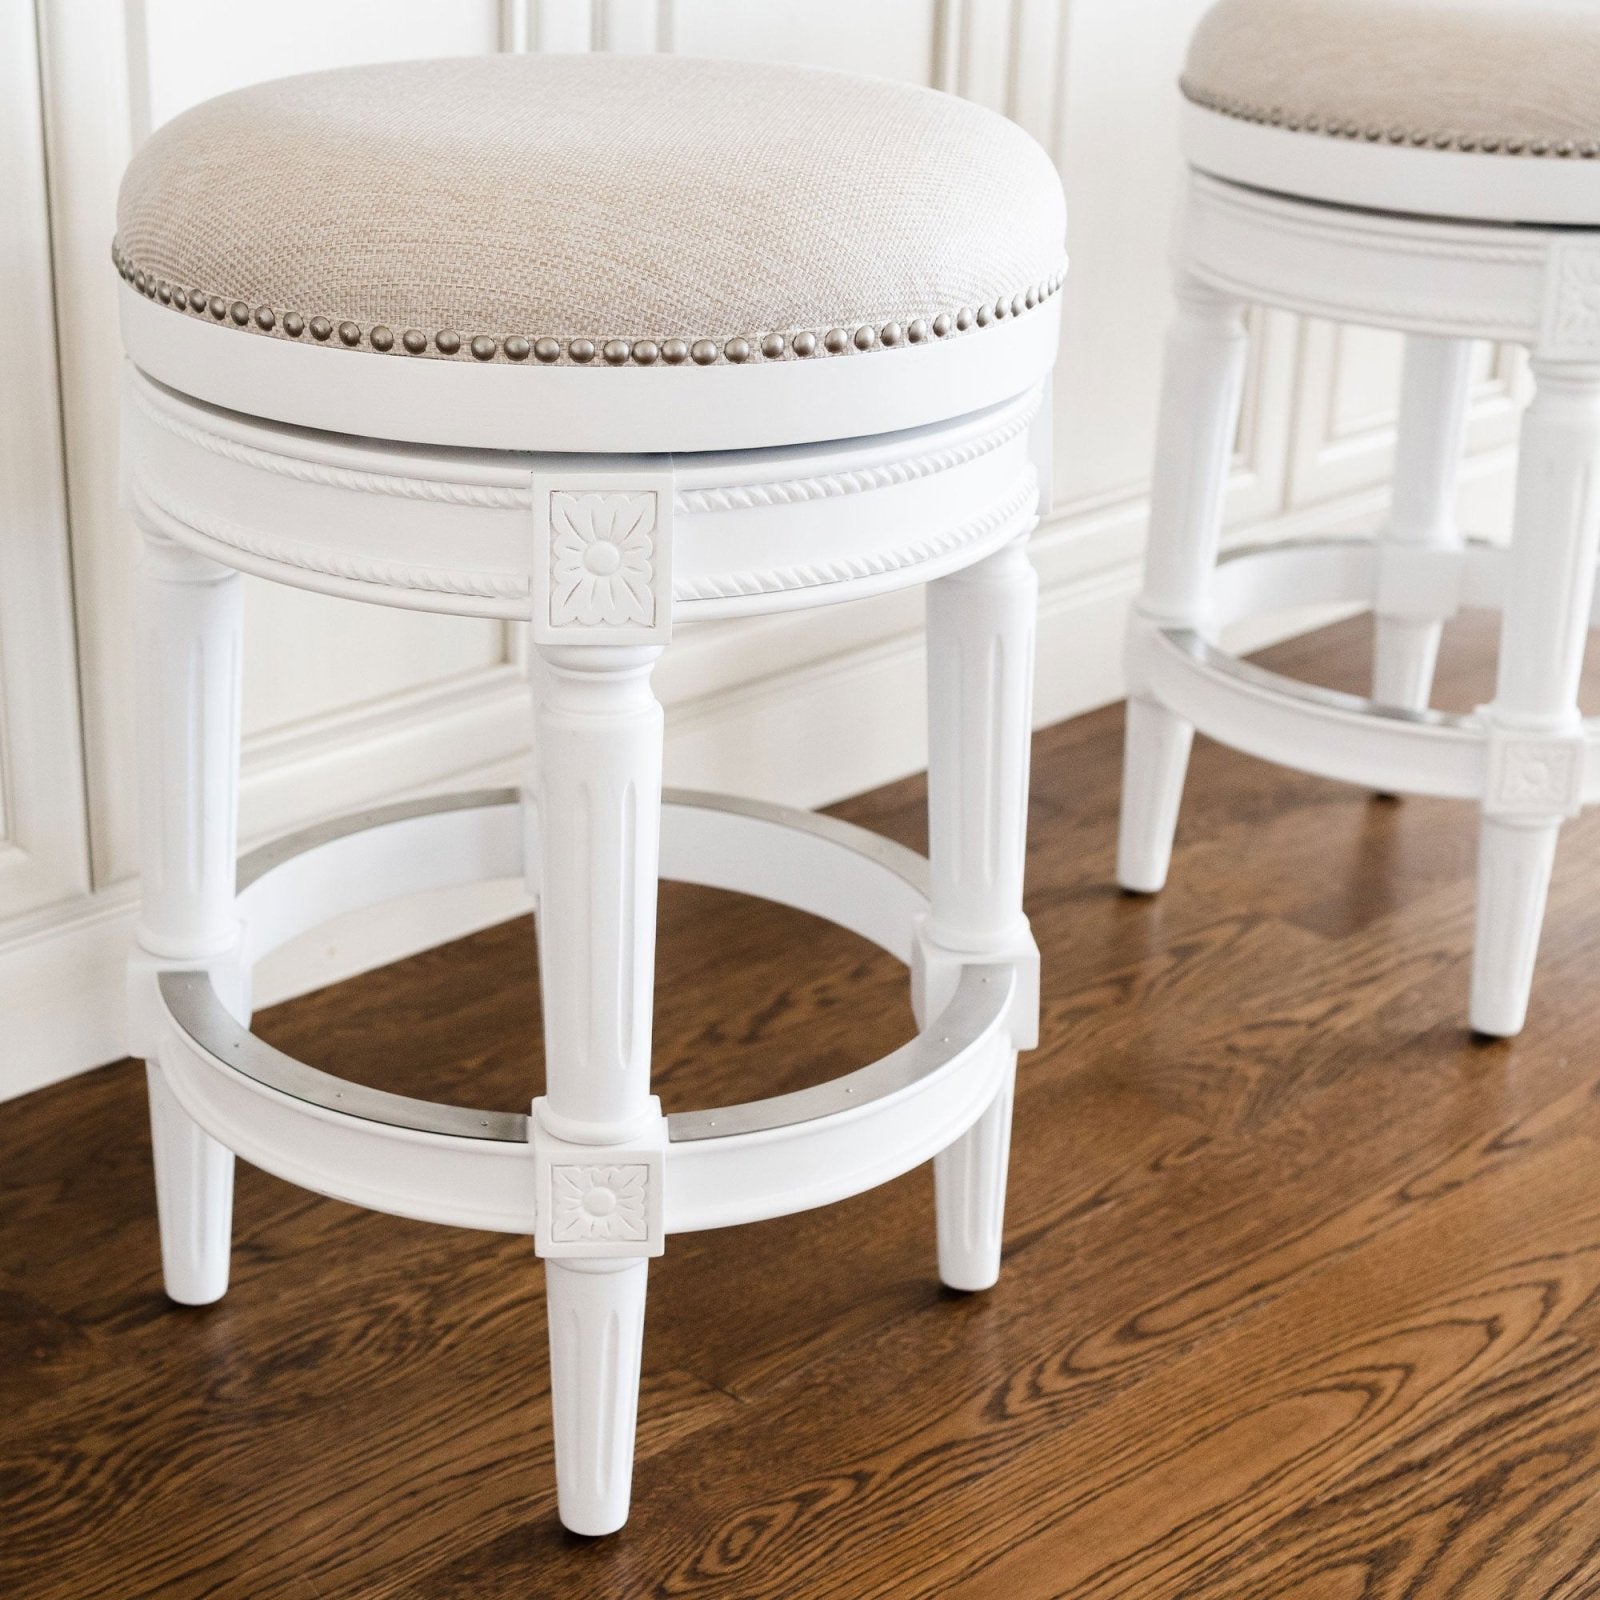 Pullman Backless Counter Stool in Alabaster White Finish with Cream Fabric Upholstery in Stools by Maven Lane